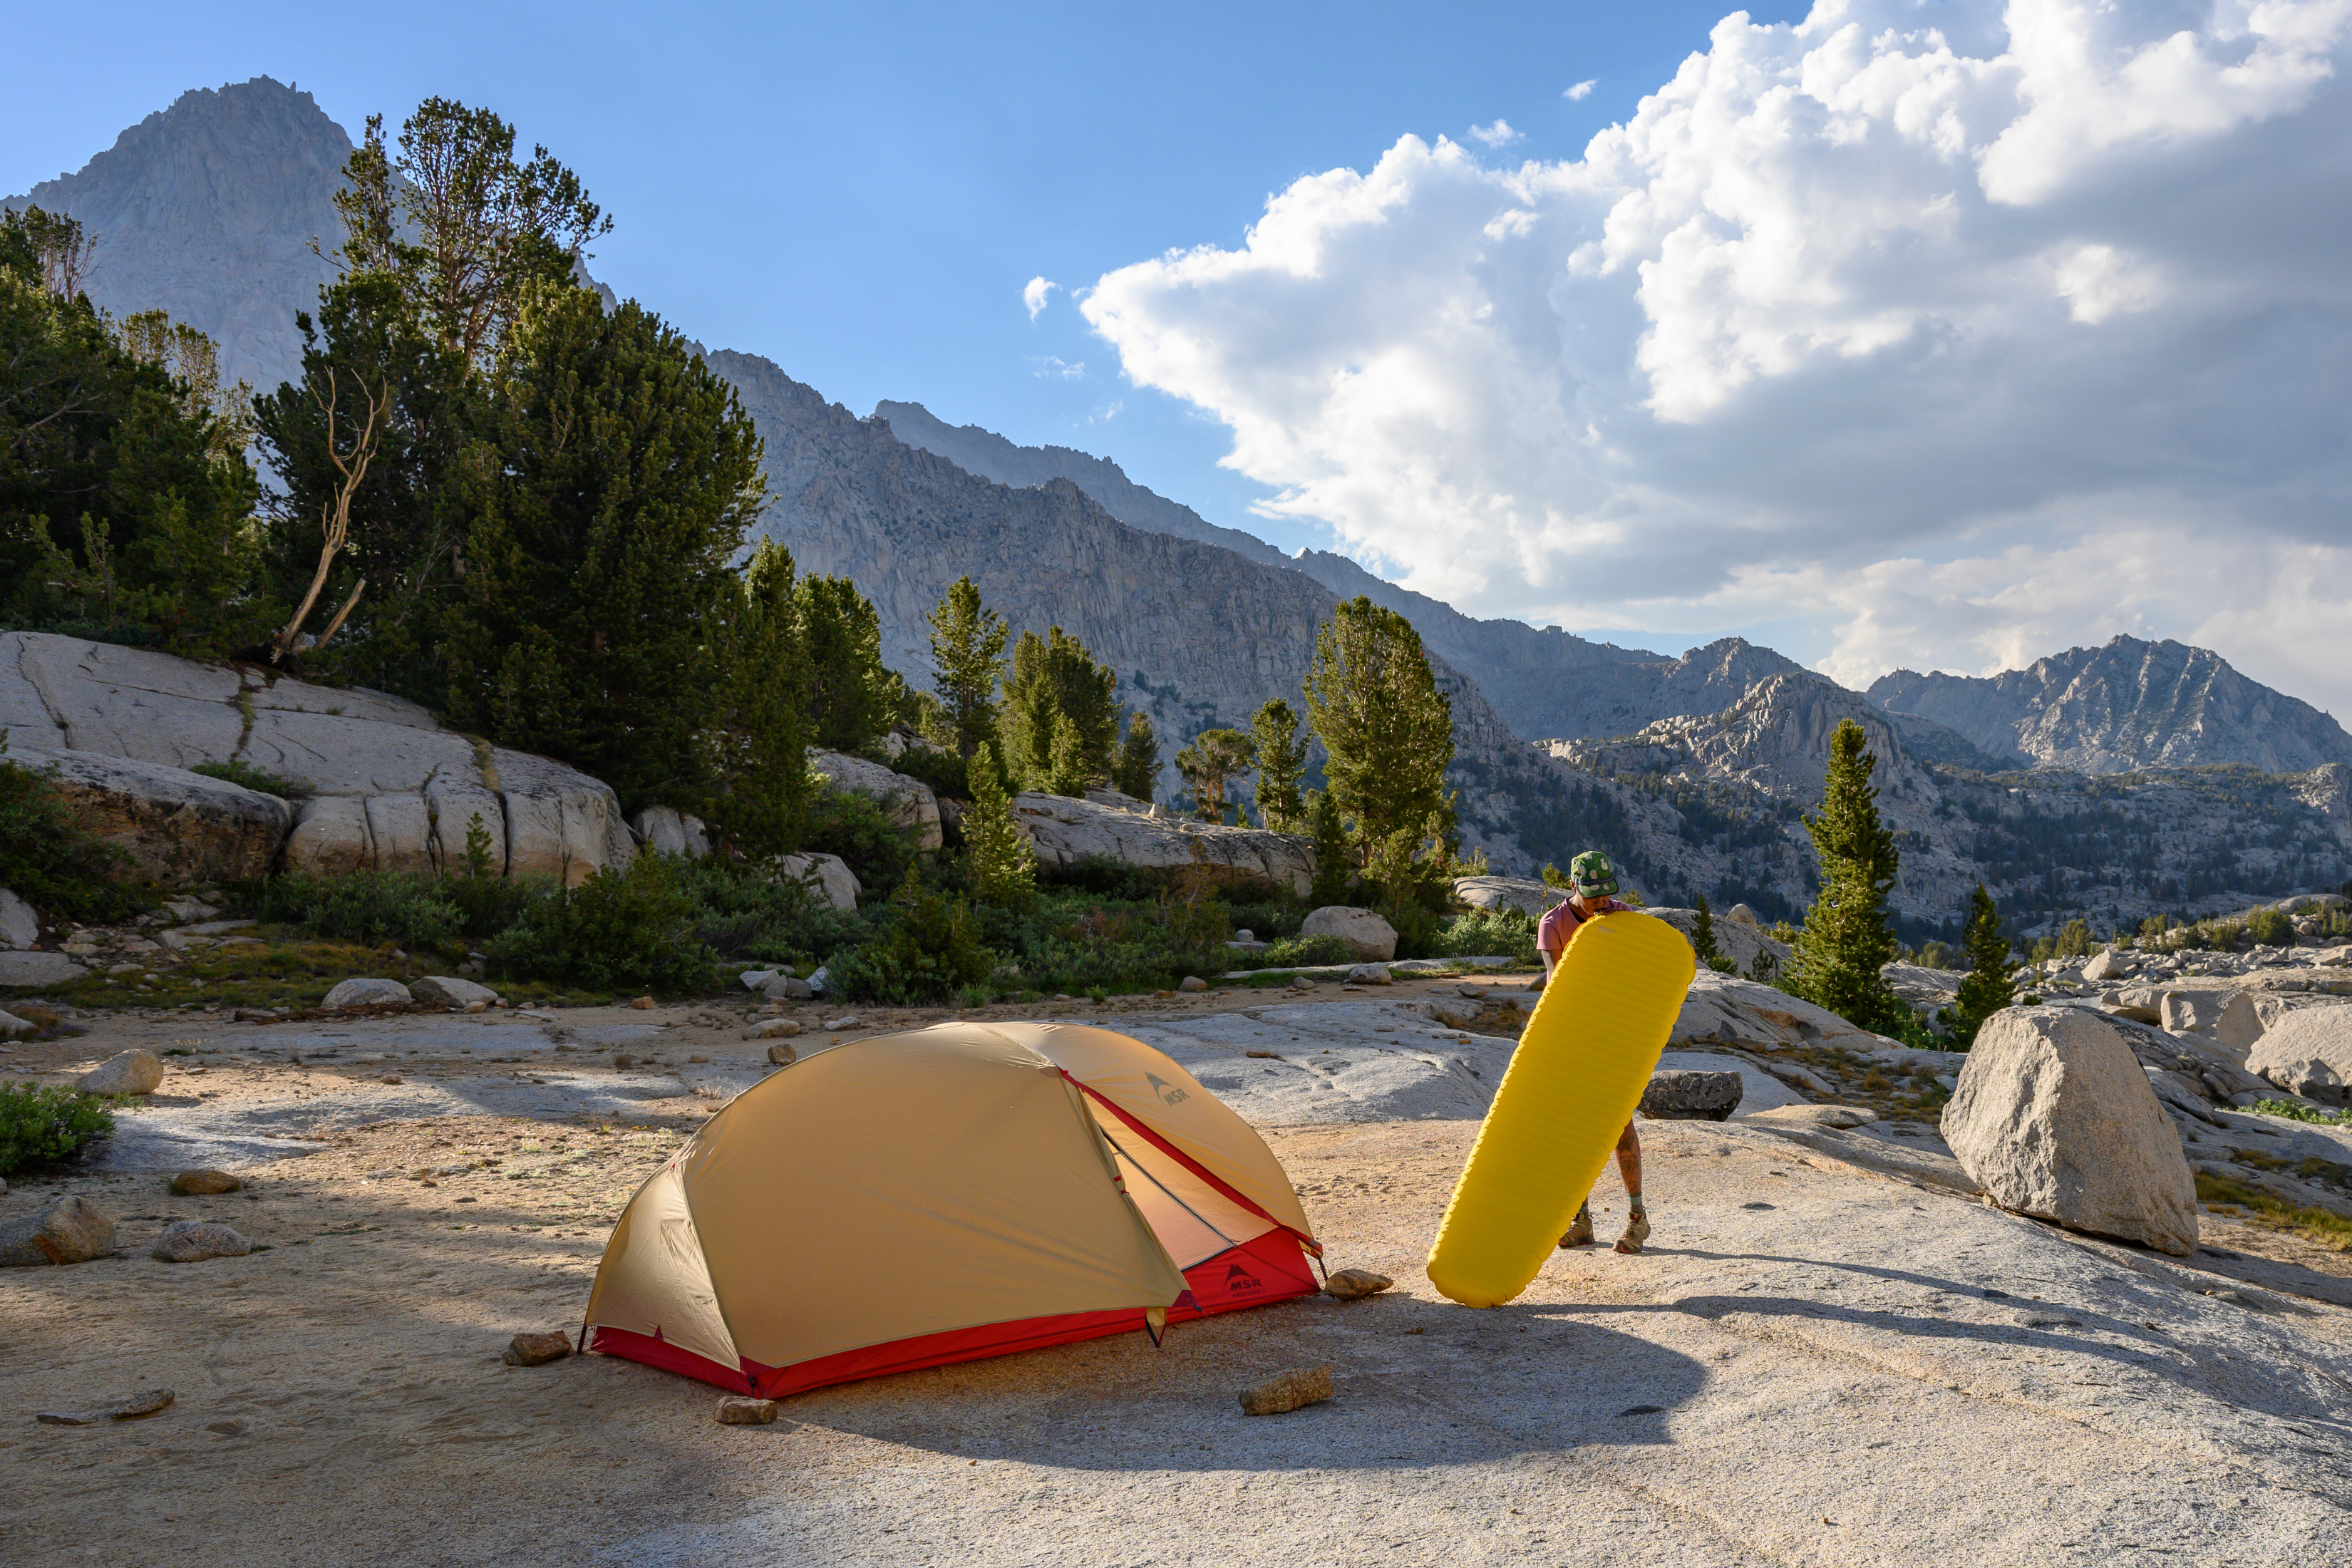 Free Gear Friday: Win a Backpacking Package From MSR, Therm-a-Rest, Platypus, and PackTowl